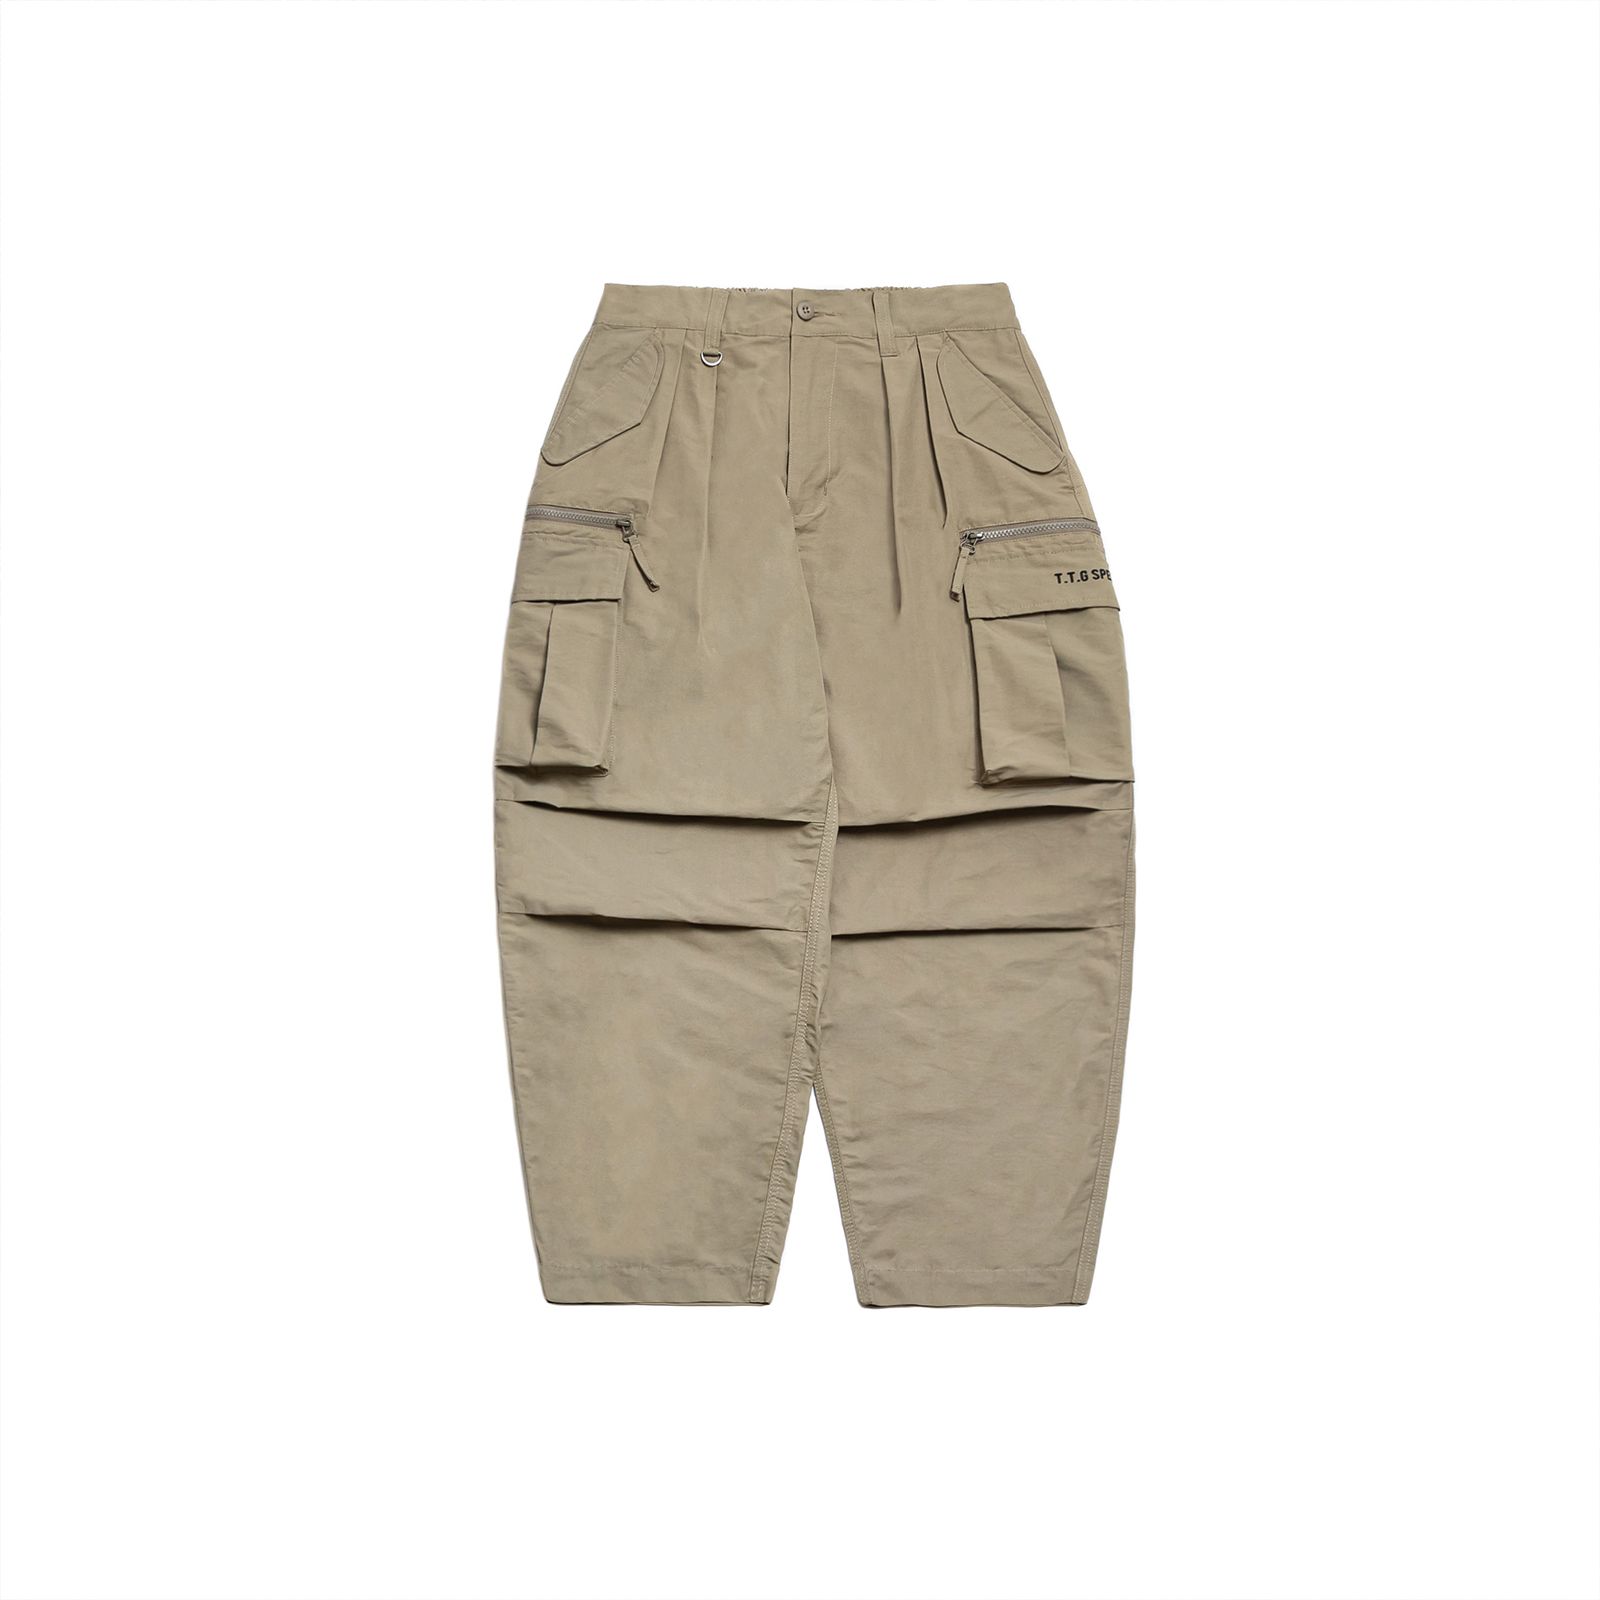 Persevere cargo pants日本では入手困難品 - その他